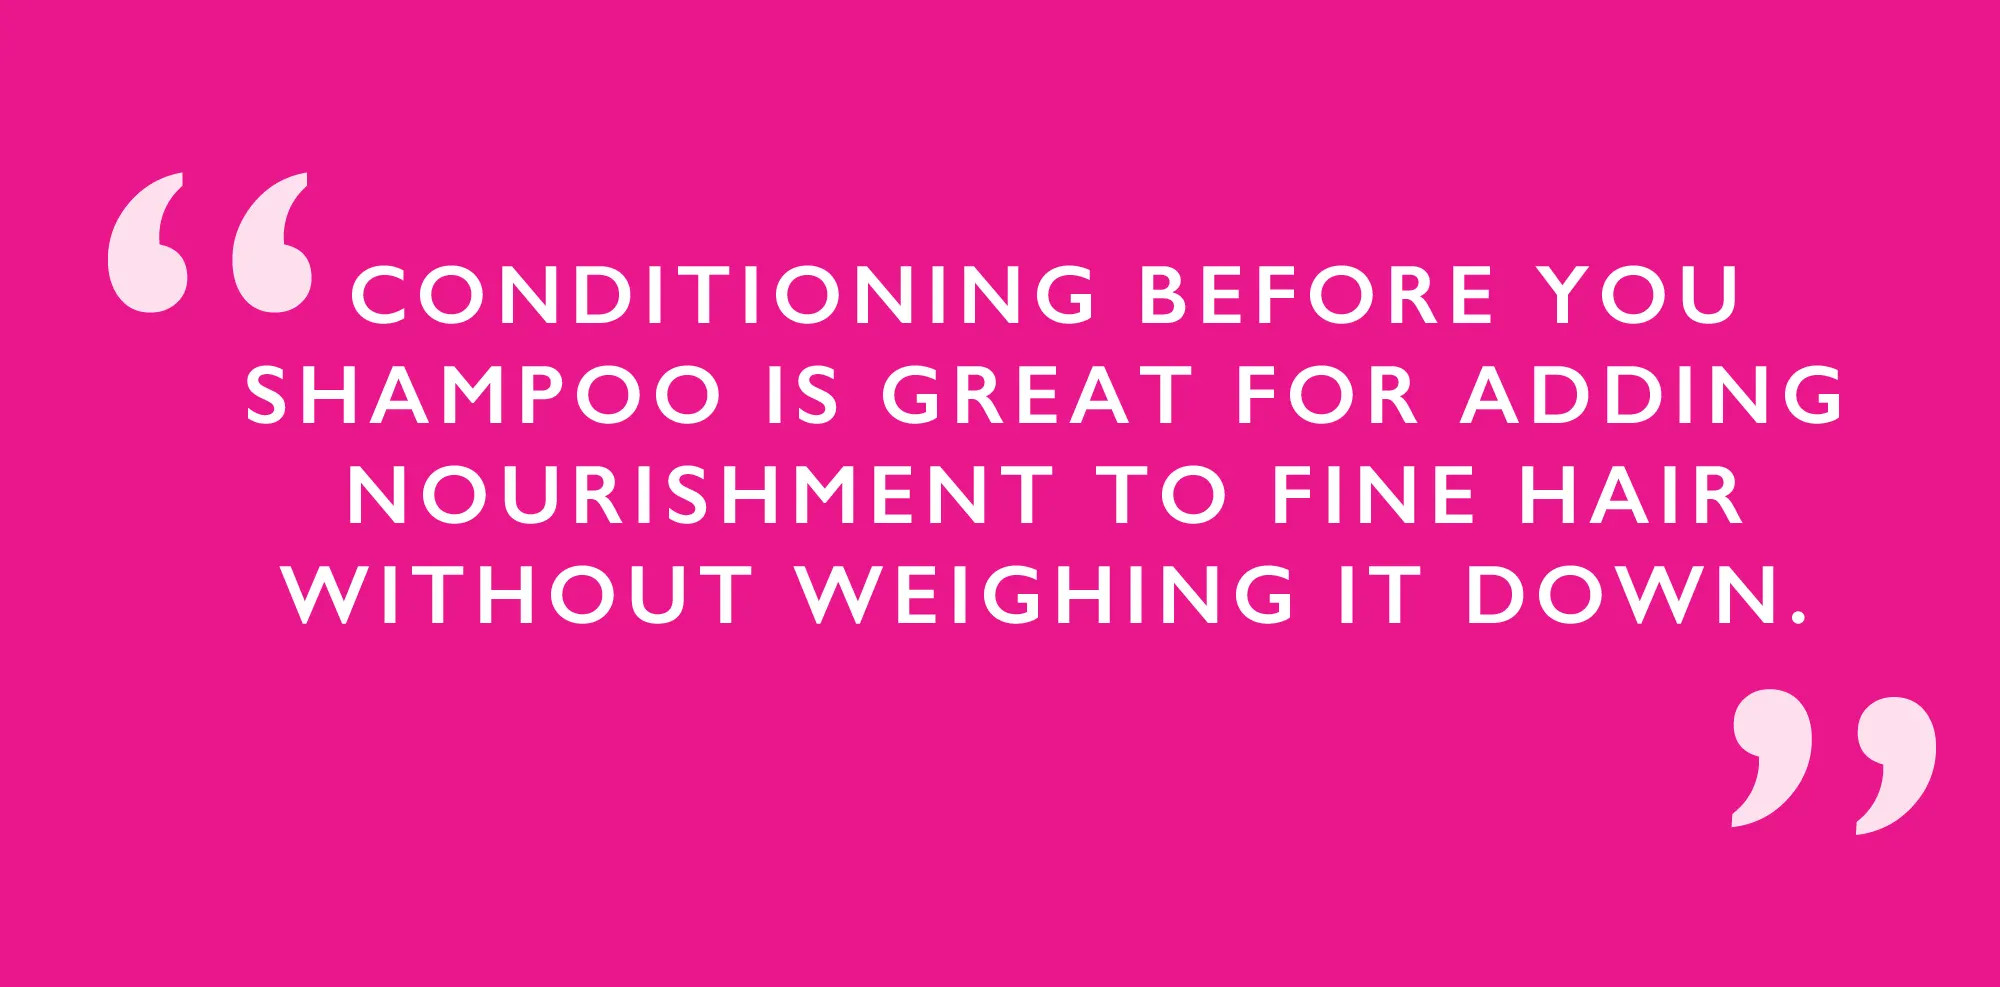 Conditioning before you shampoo is great for adding nourishment to fine hair without weighing it down. 